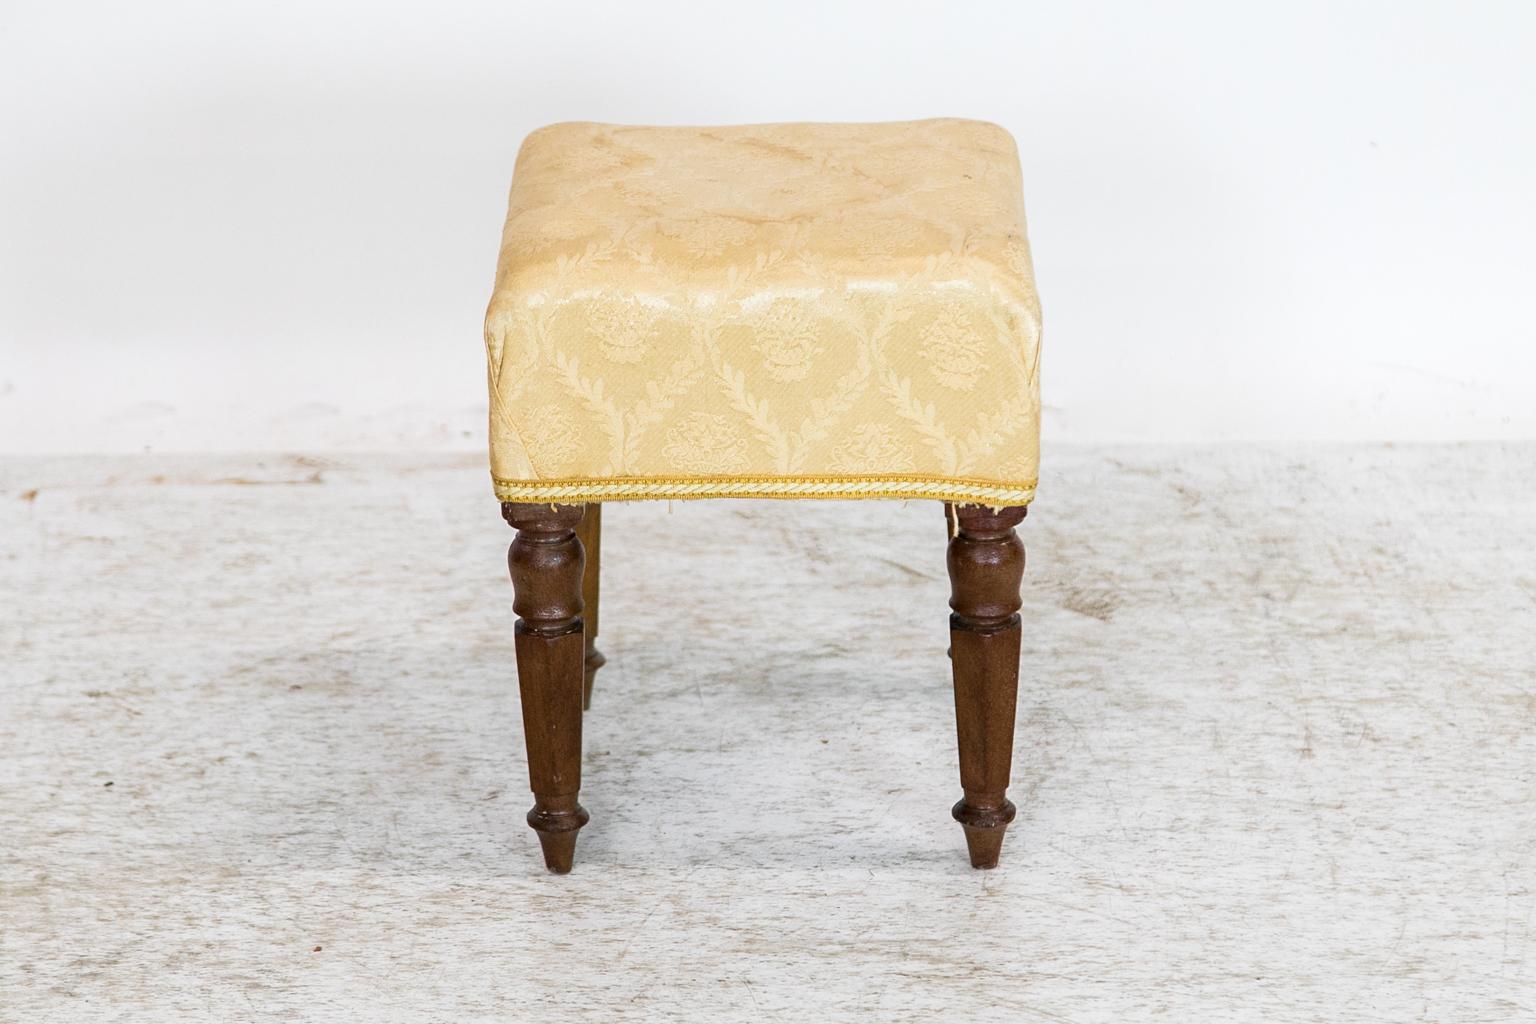 The legs of this stool are turned at the top and extend in a hexagonal shape. The upholstery has stains and would need to be replaced.
  